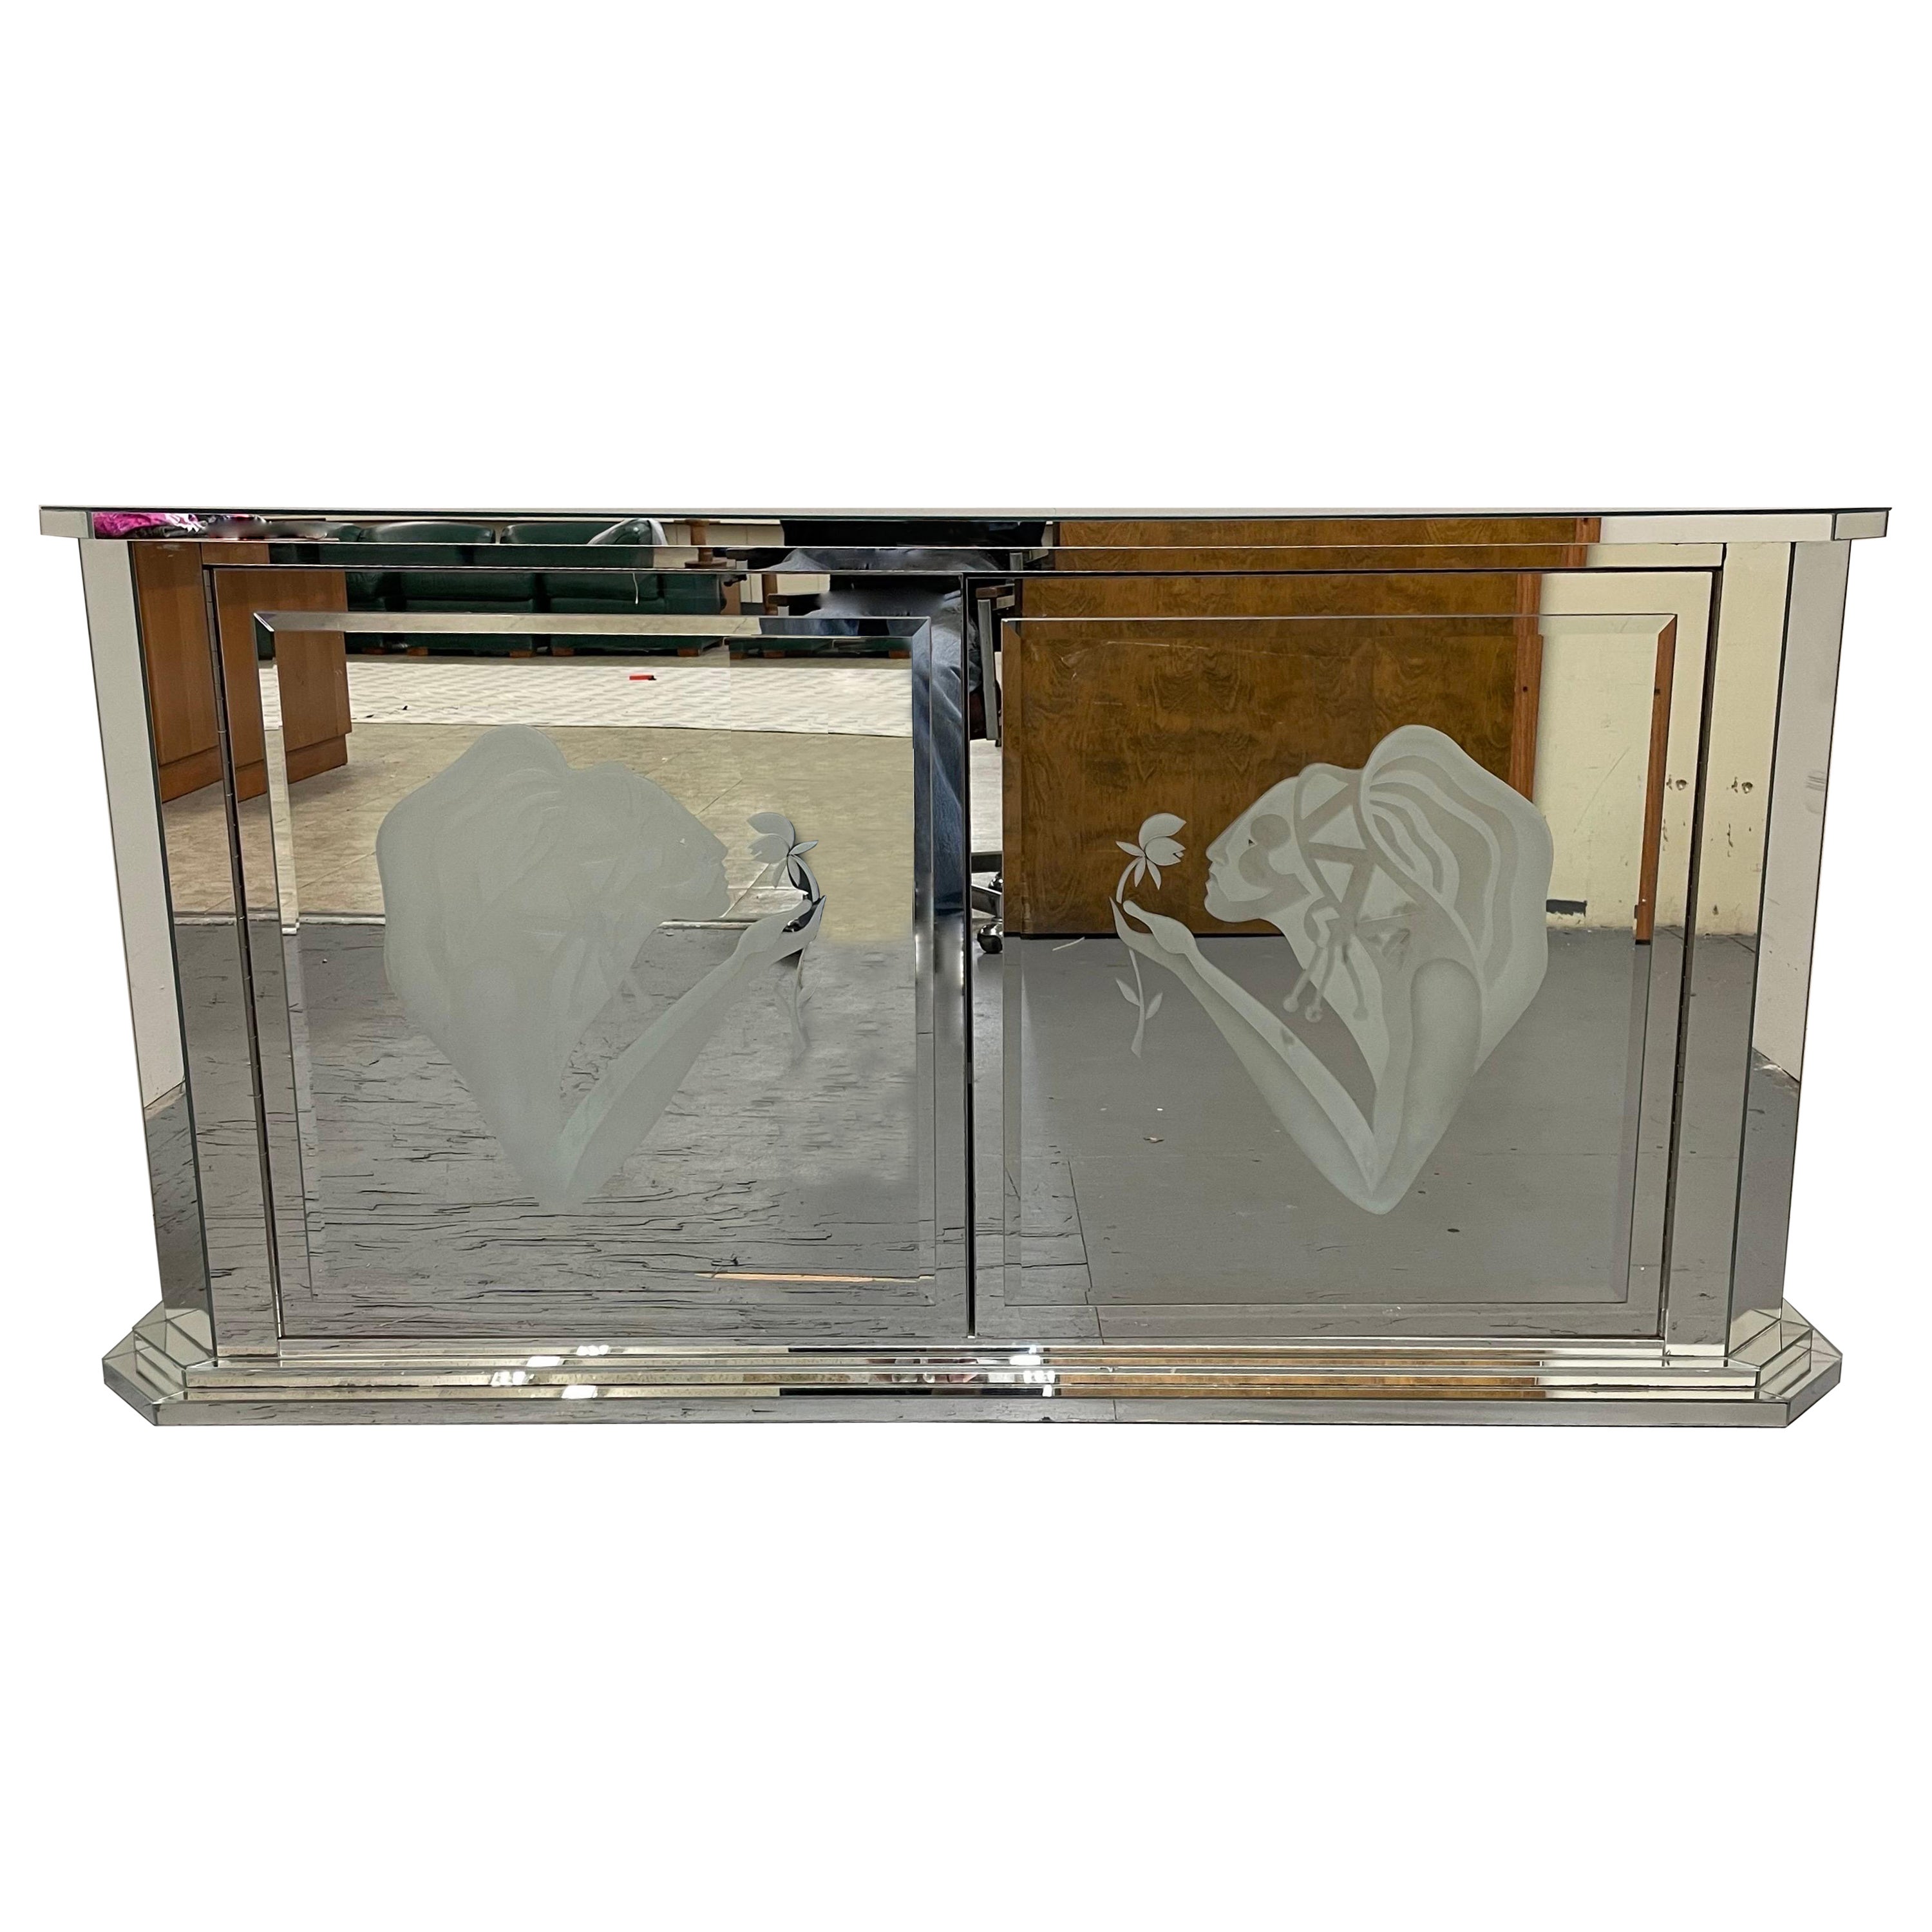 Unique Art Deco style credenza or buffet. All mirror(not back) with etched doors and stepped trim. Beautiful etchings of women and flowers. On spring hinge closures and one interior adjustable shelf.